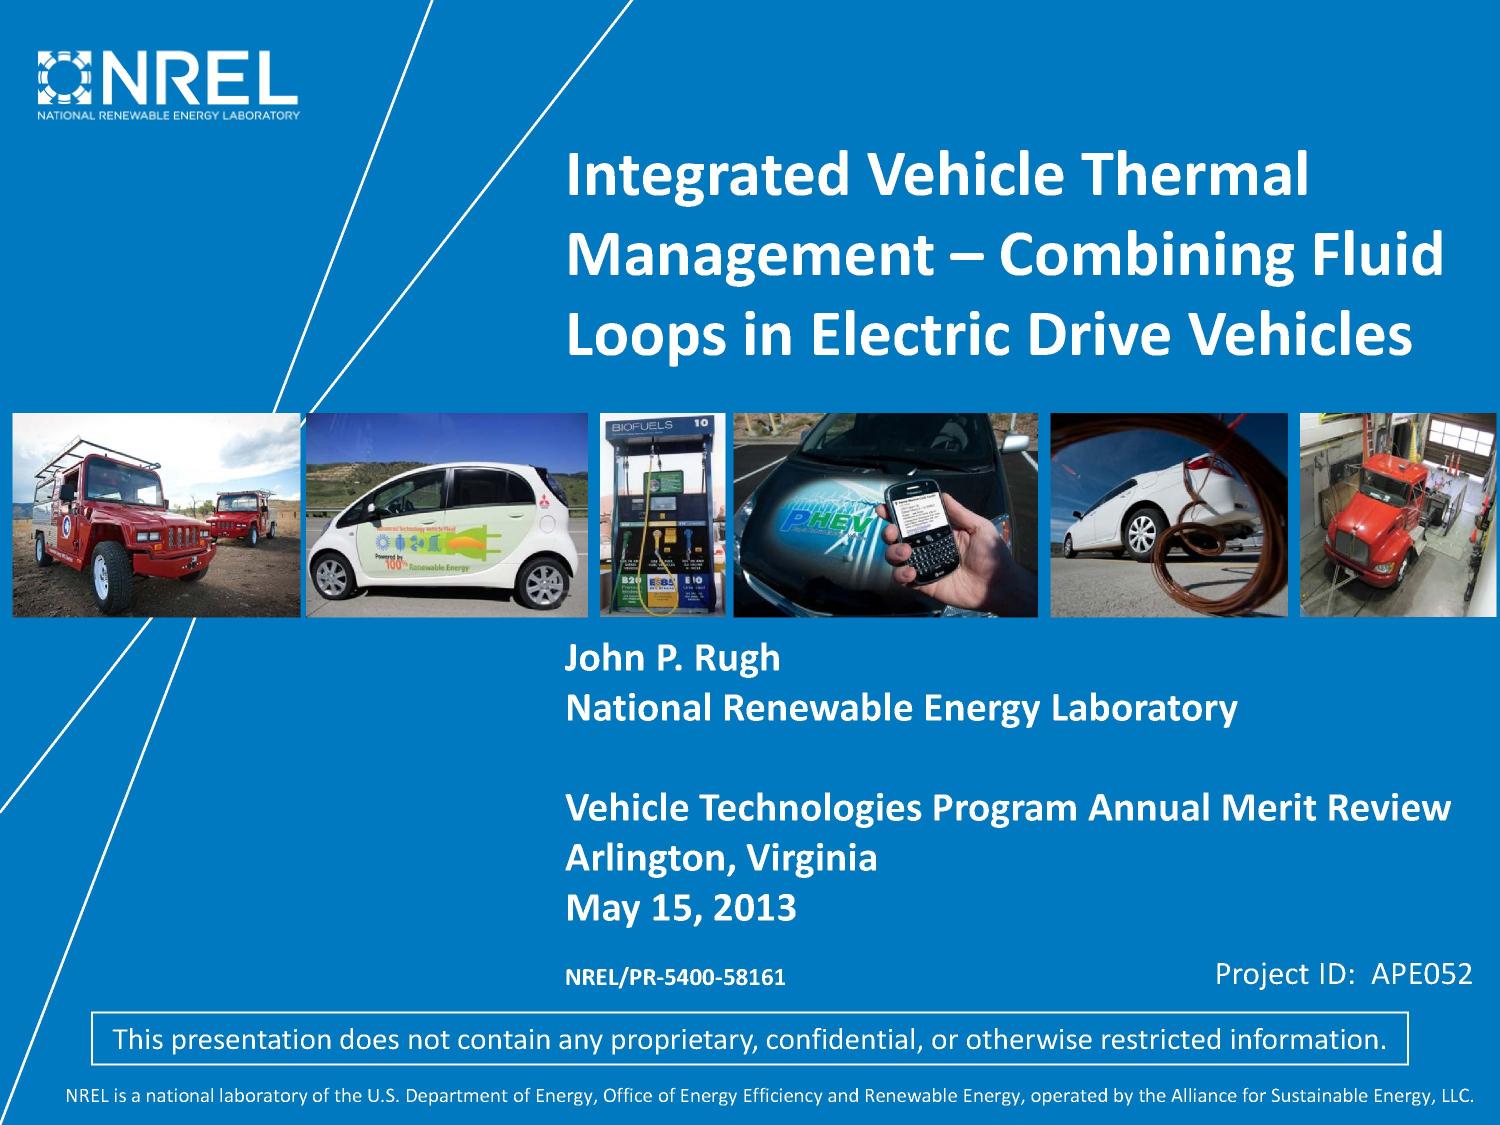 Integrated Vehicle Thermal Management Combining Fluid Loops in